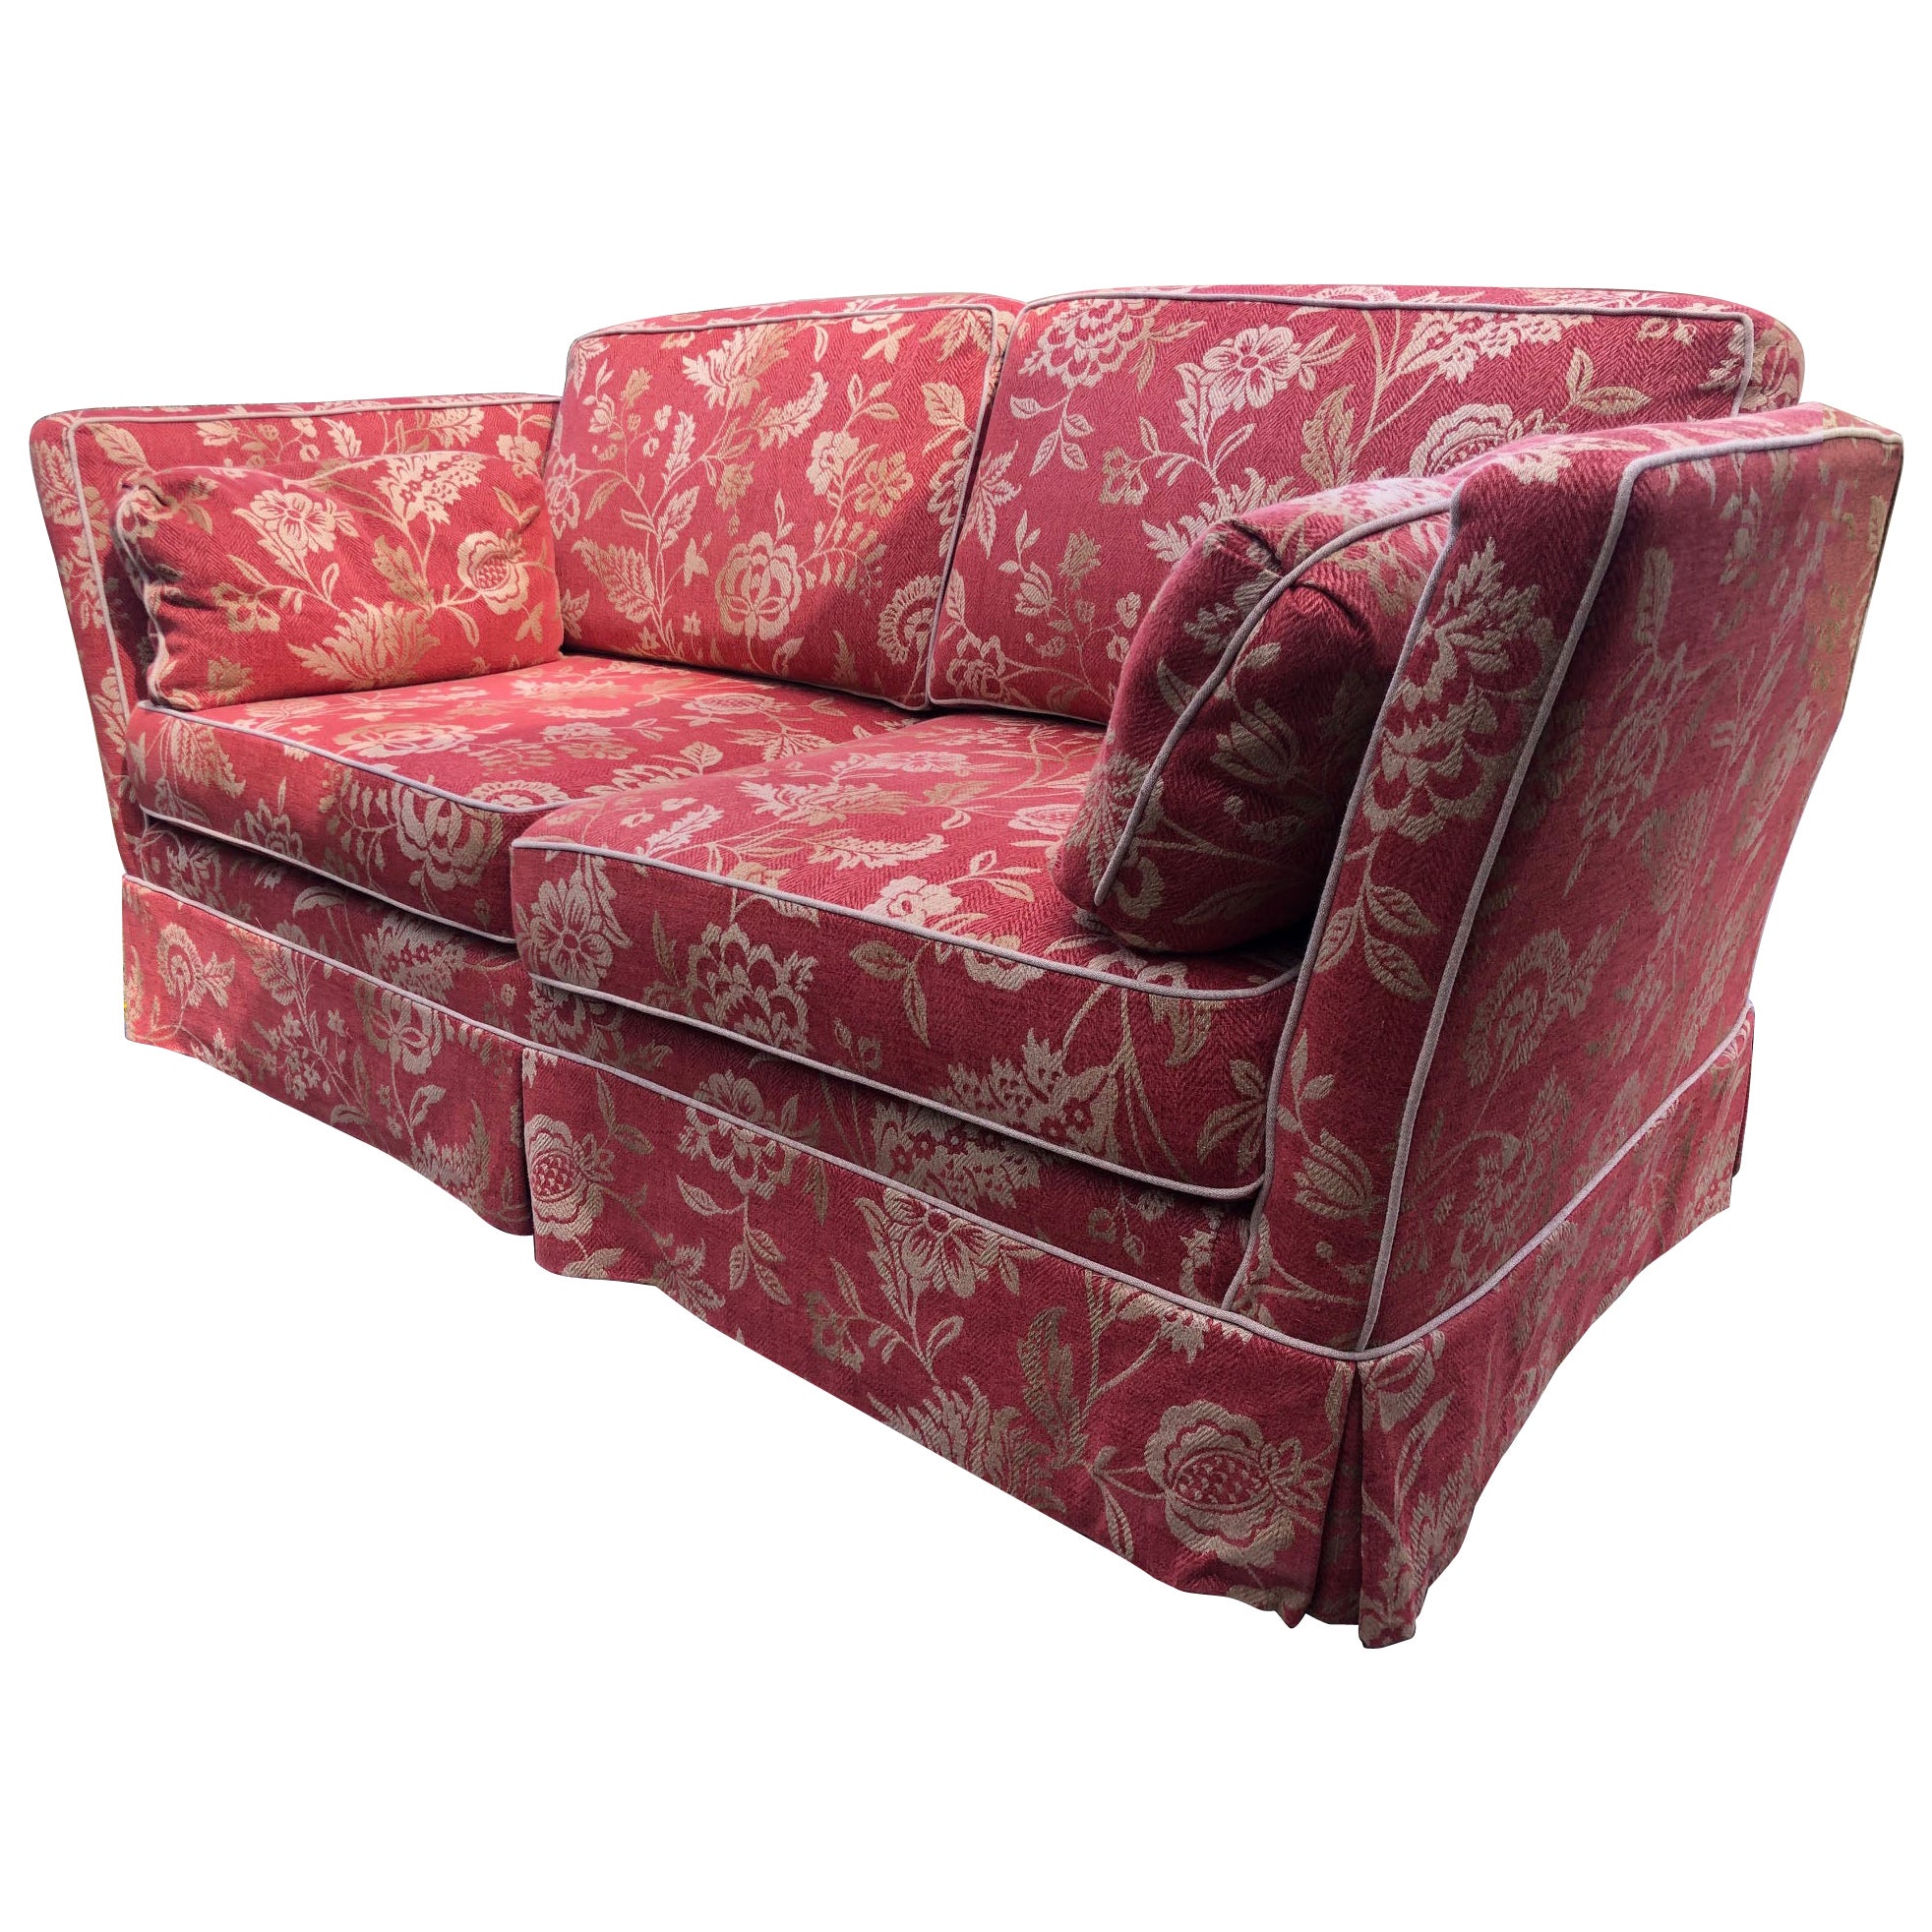 Very Elegant Fabric Sofa with Floral Motifs